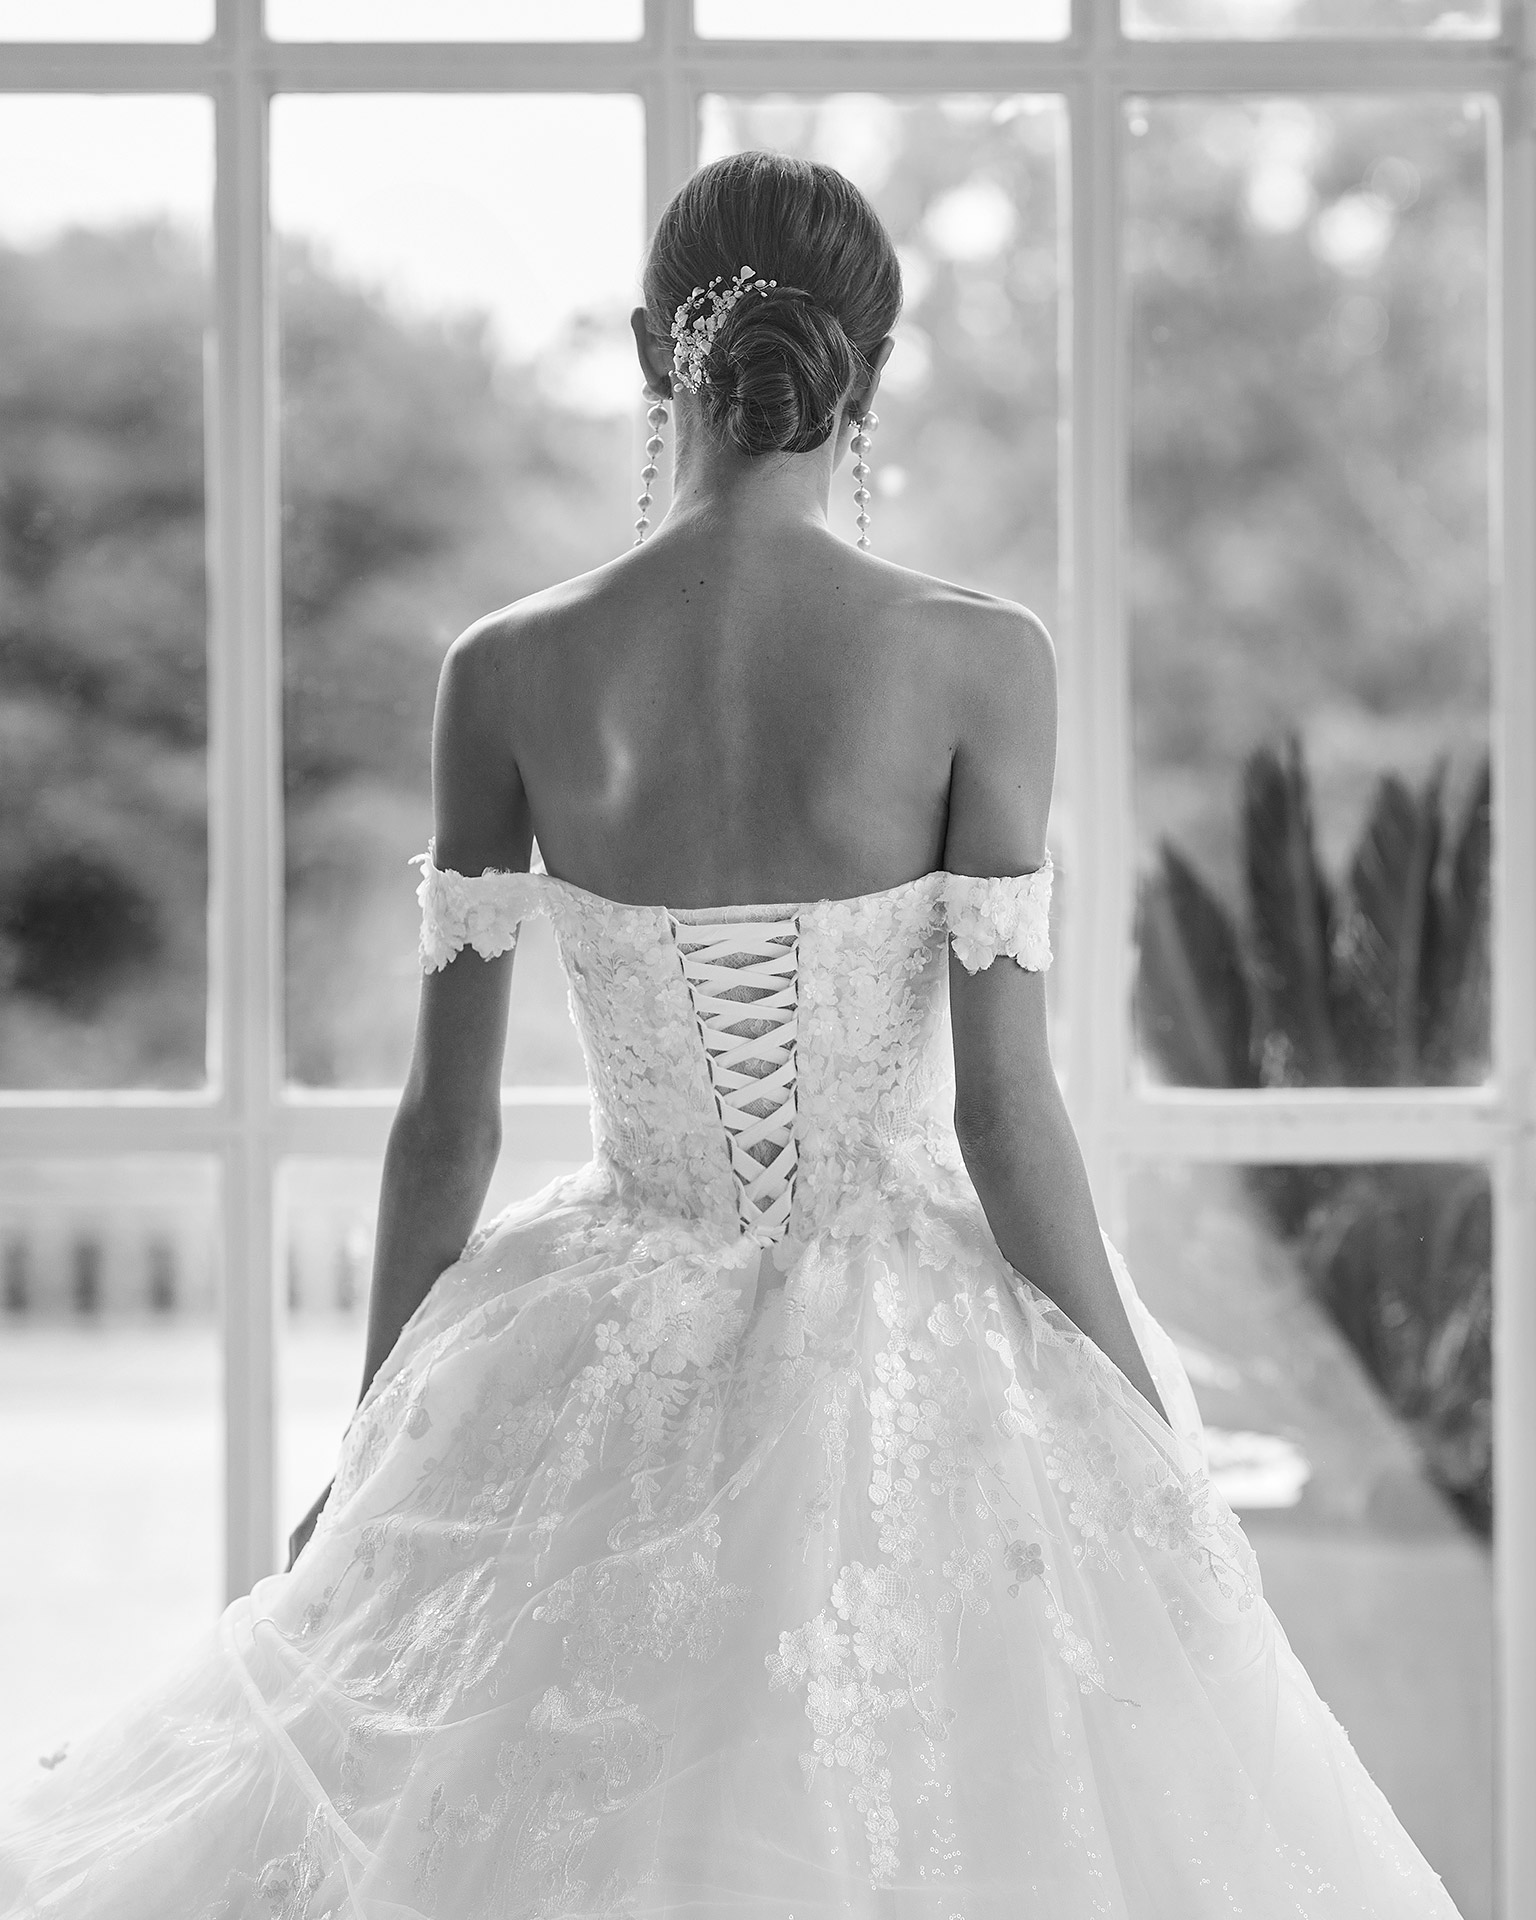 Princess-style wedding dress, with an appliqué and beadwork embellished bodice; with a deep-plunge neckline, a corset back, and dropped sleeves. Delicate Luna Studio look made of tulle and beadwork lace. LUNA_NOVIAS.